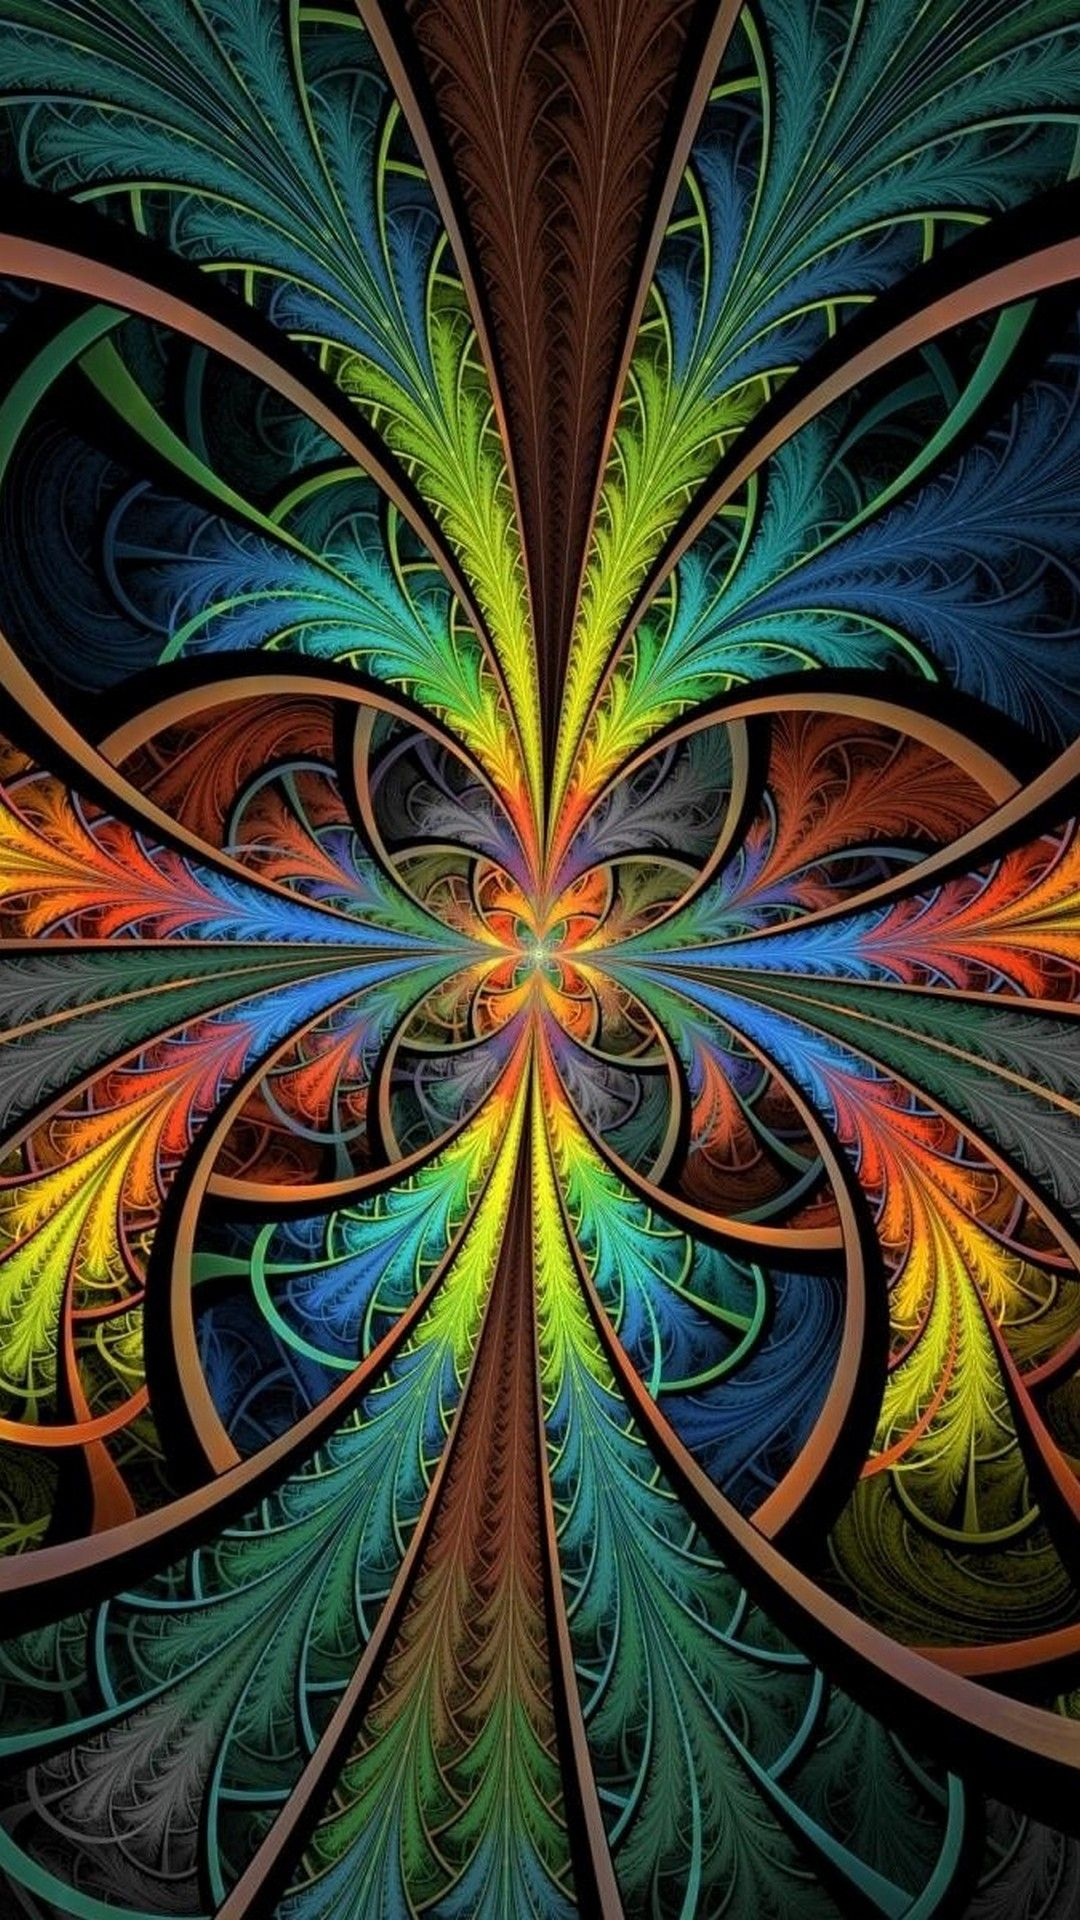 1080x1920 Psychedelic Wallpaper For iPhone Best iPhone Wallpaper | Trippy wallpaper, Trippy iphone wallpaper, Psychedelic art